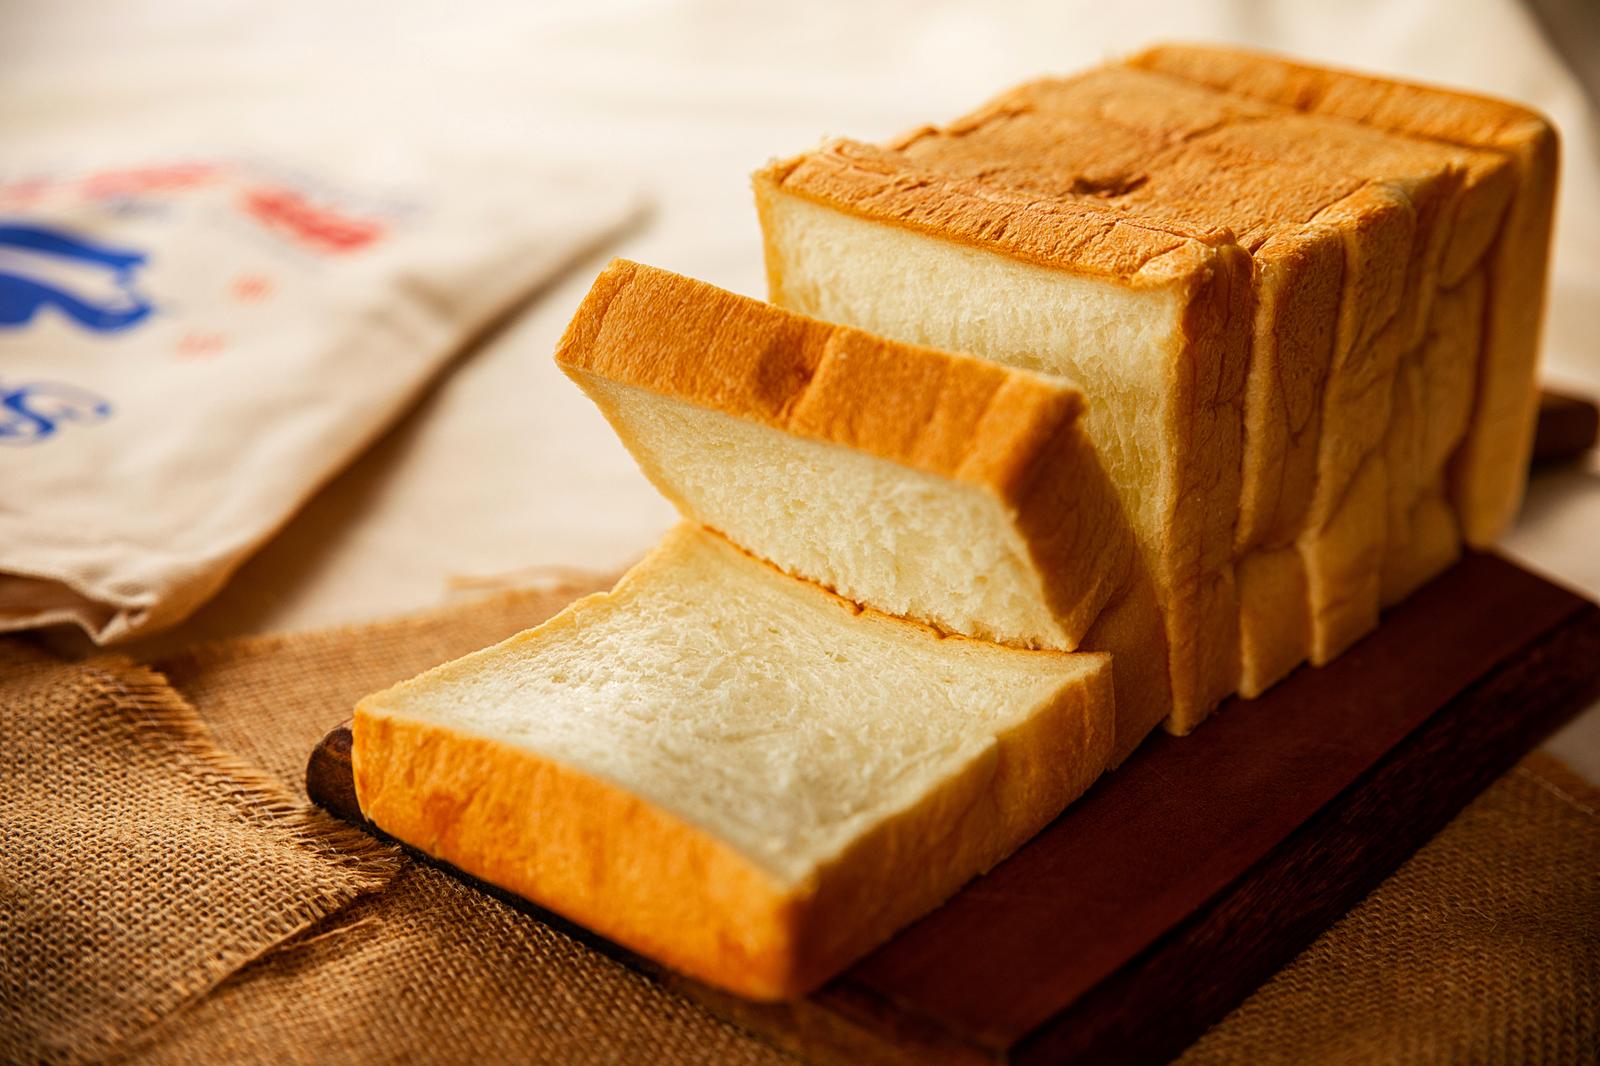 Let’s Go Back in Time! Can You Get 18/24 on This Vintage Ads Quiz? Bread